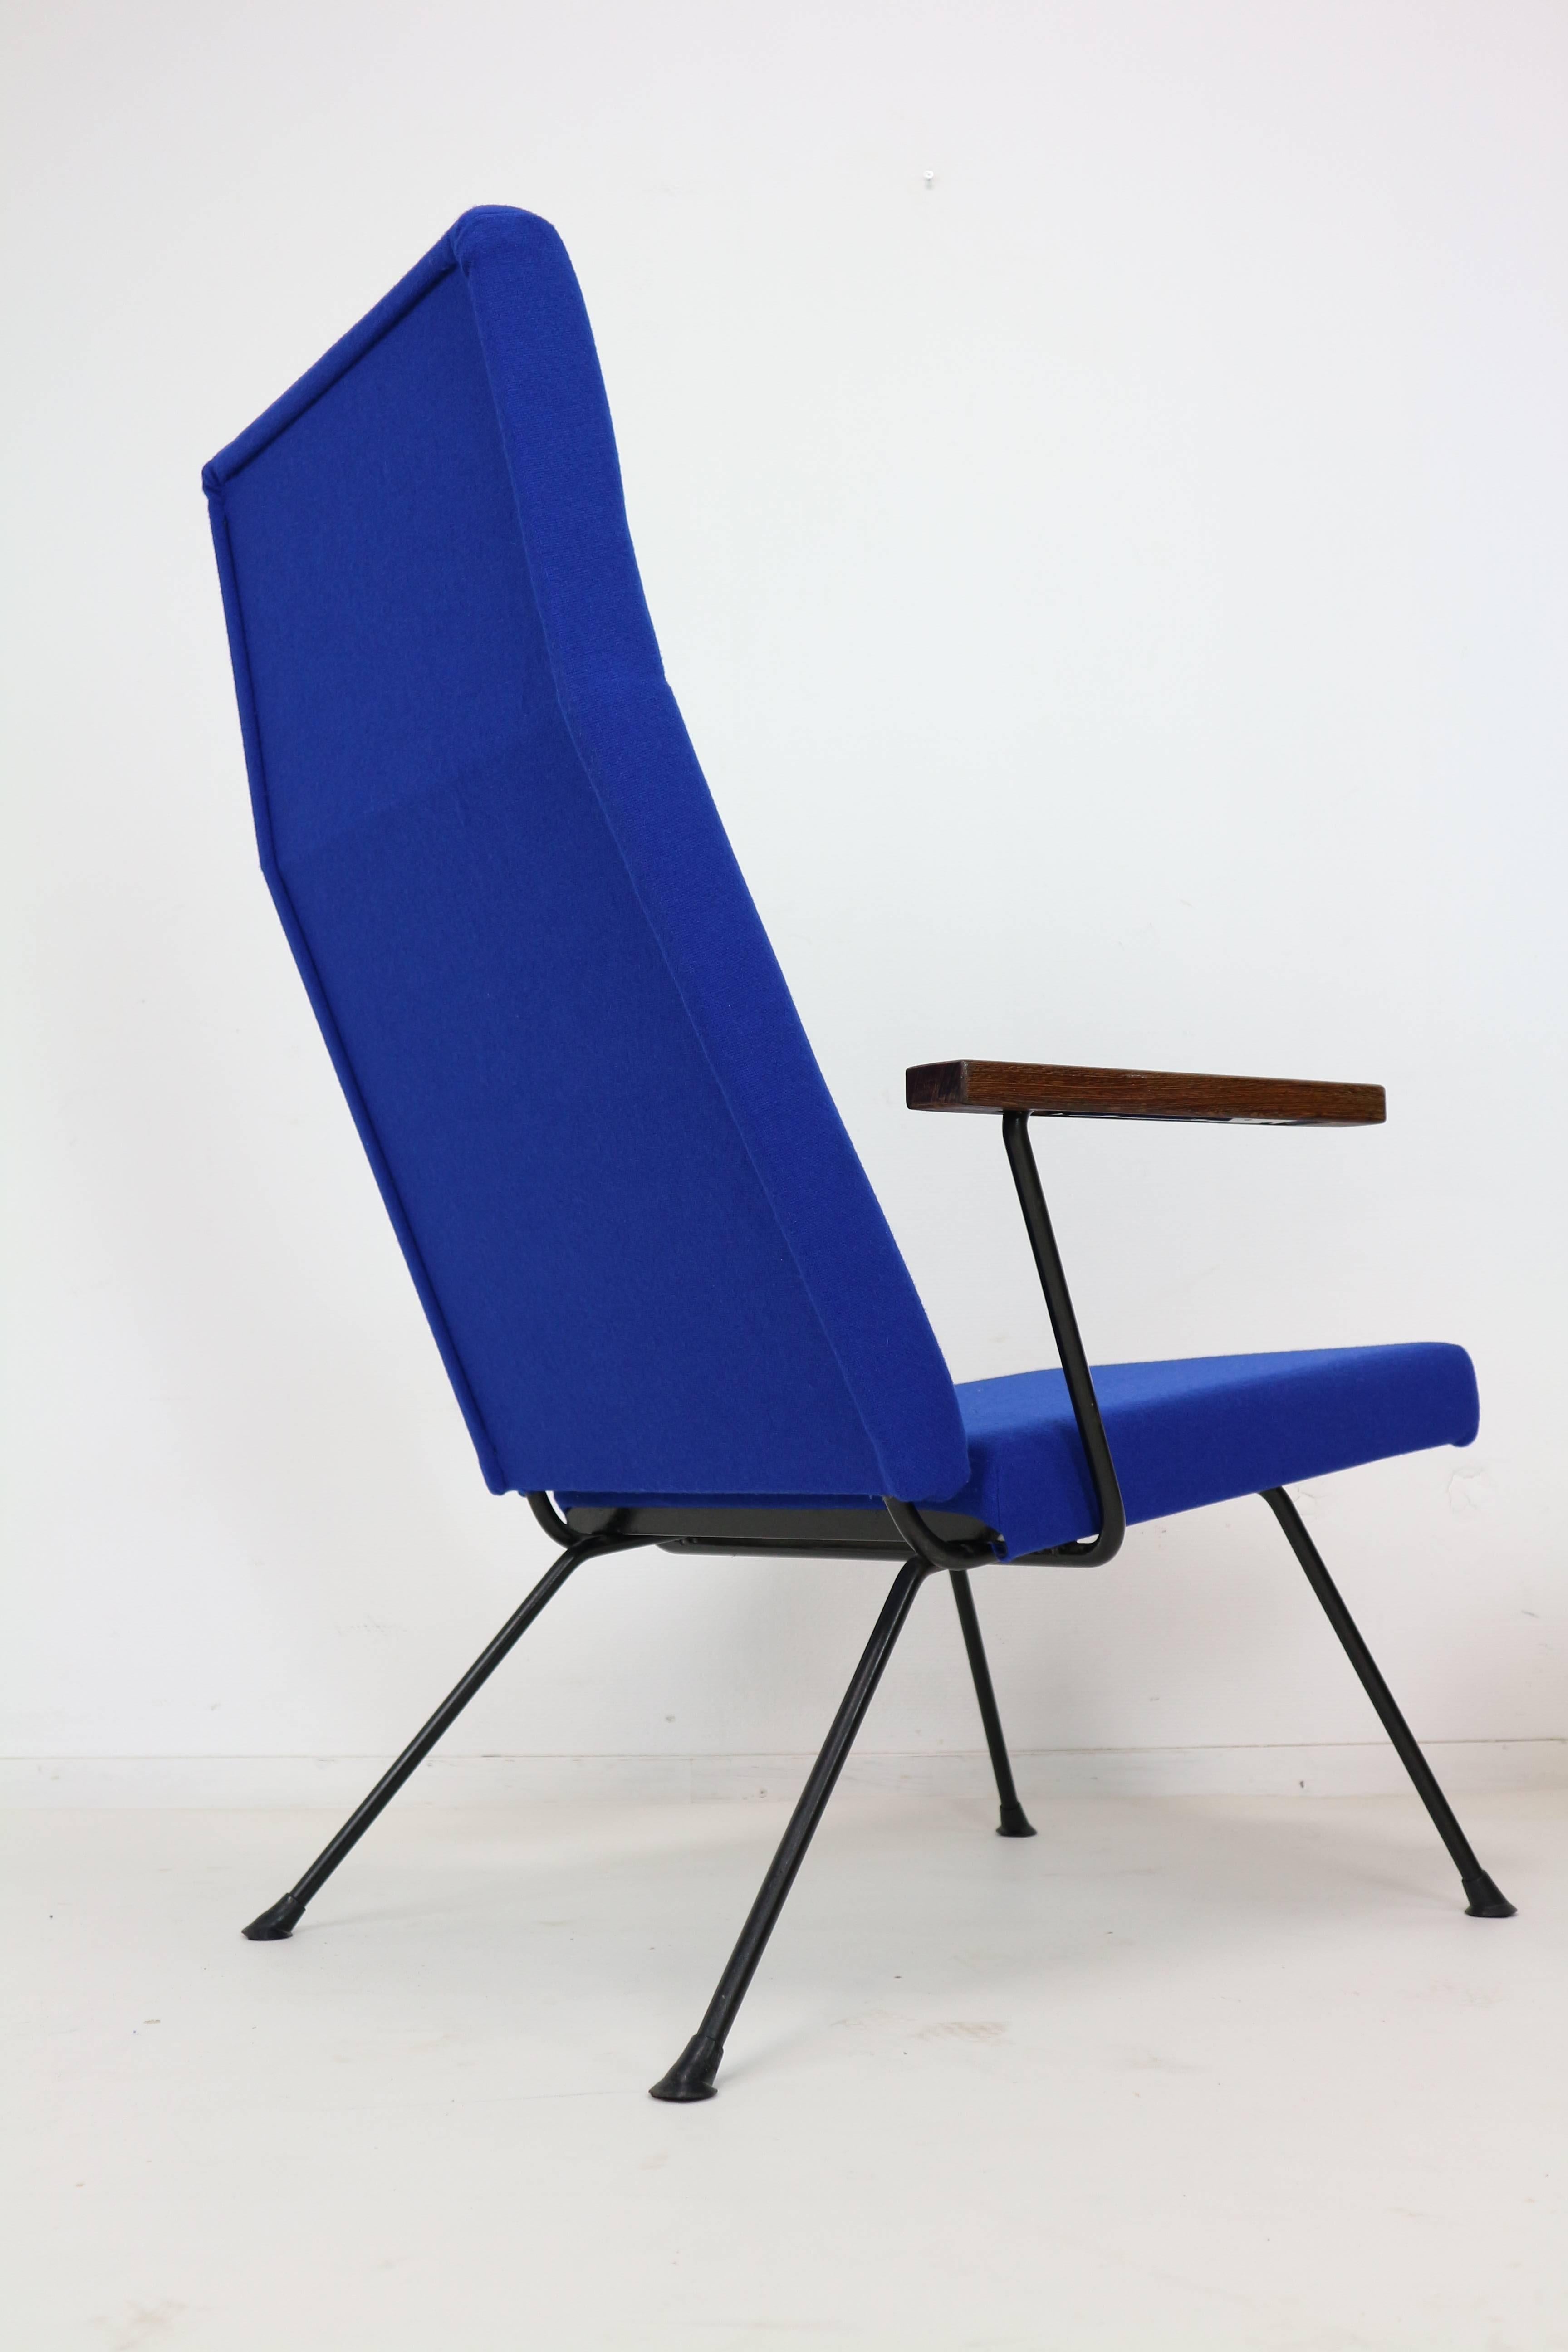 Mid-Century Modern A.R. Cordemeyer Lounge Chair Model 1410 with footstool by Gispen, 1959